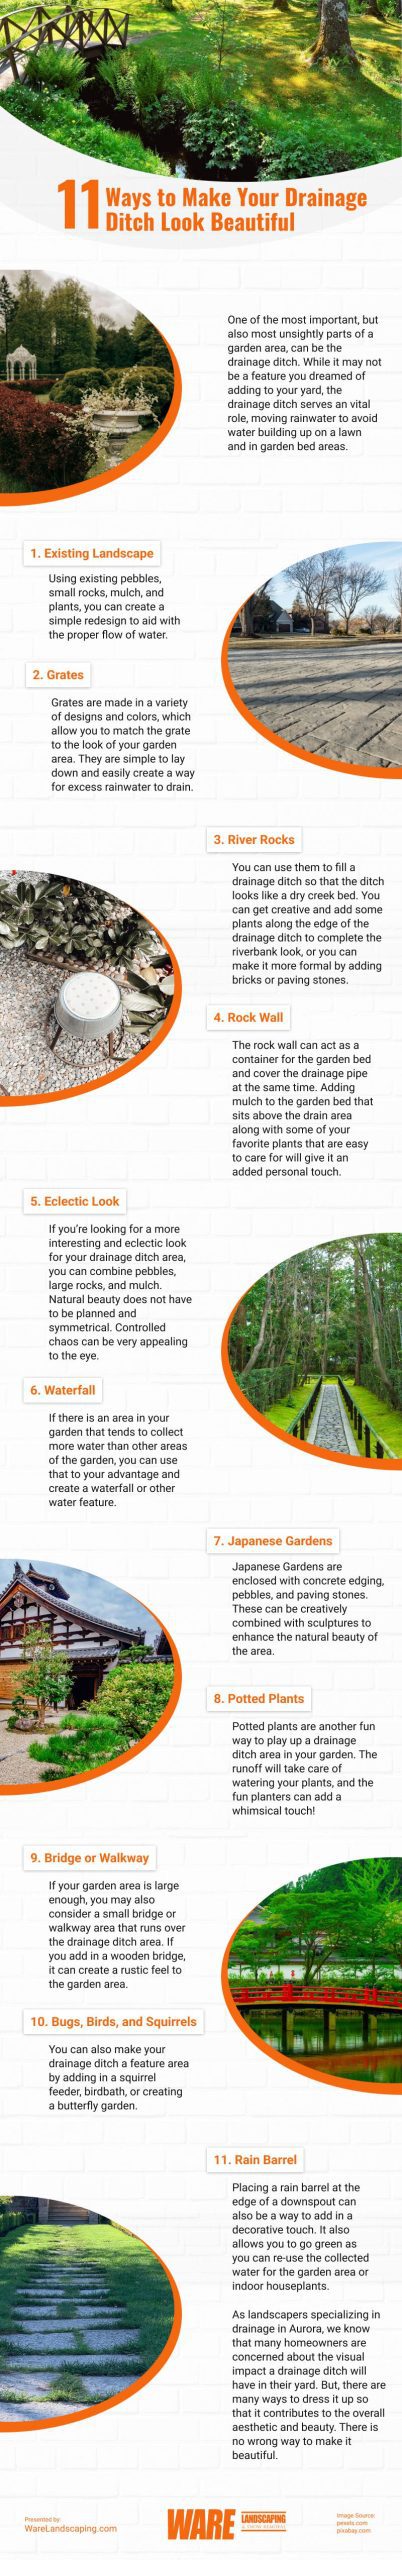 11 Ways to Make Your Drainage Ditch Look Beautiful Infographic